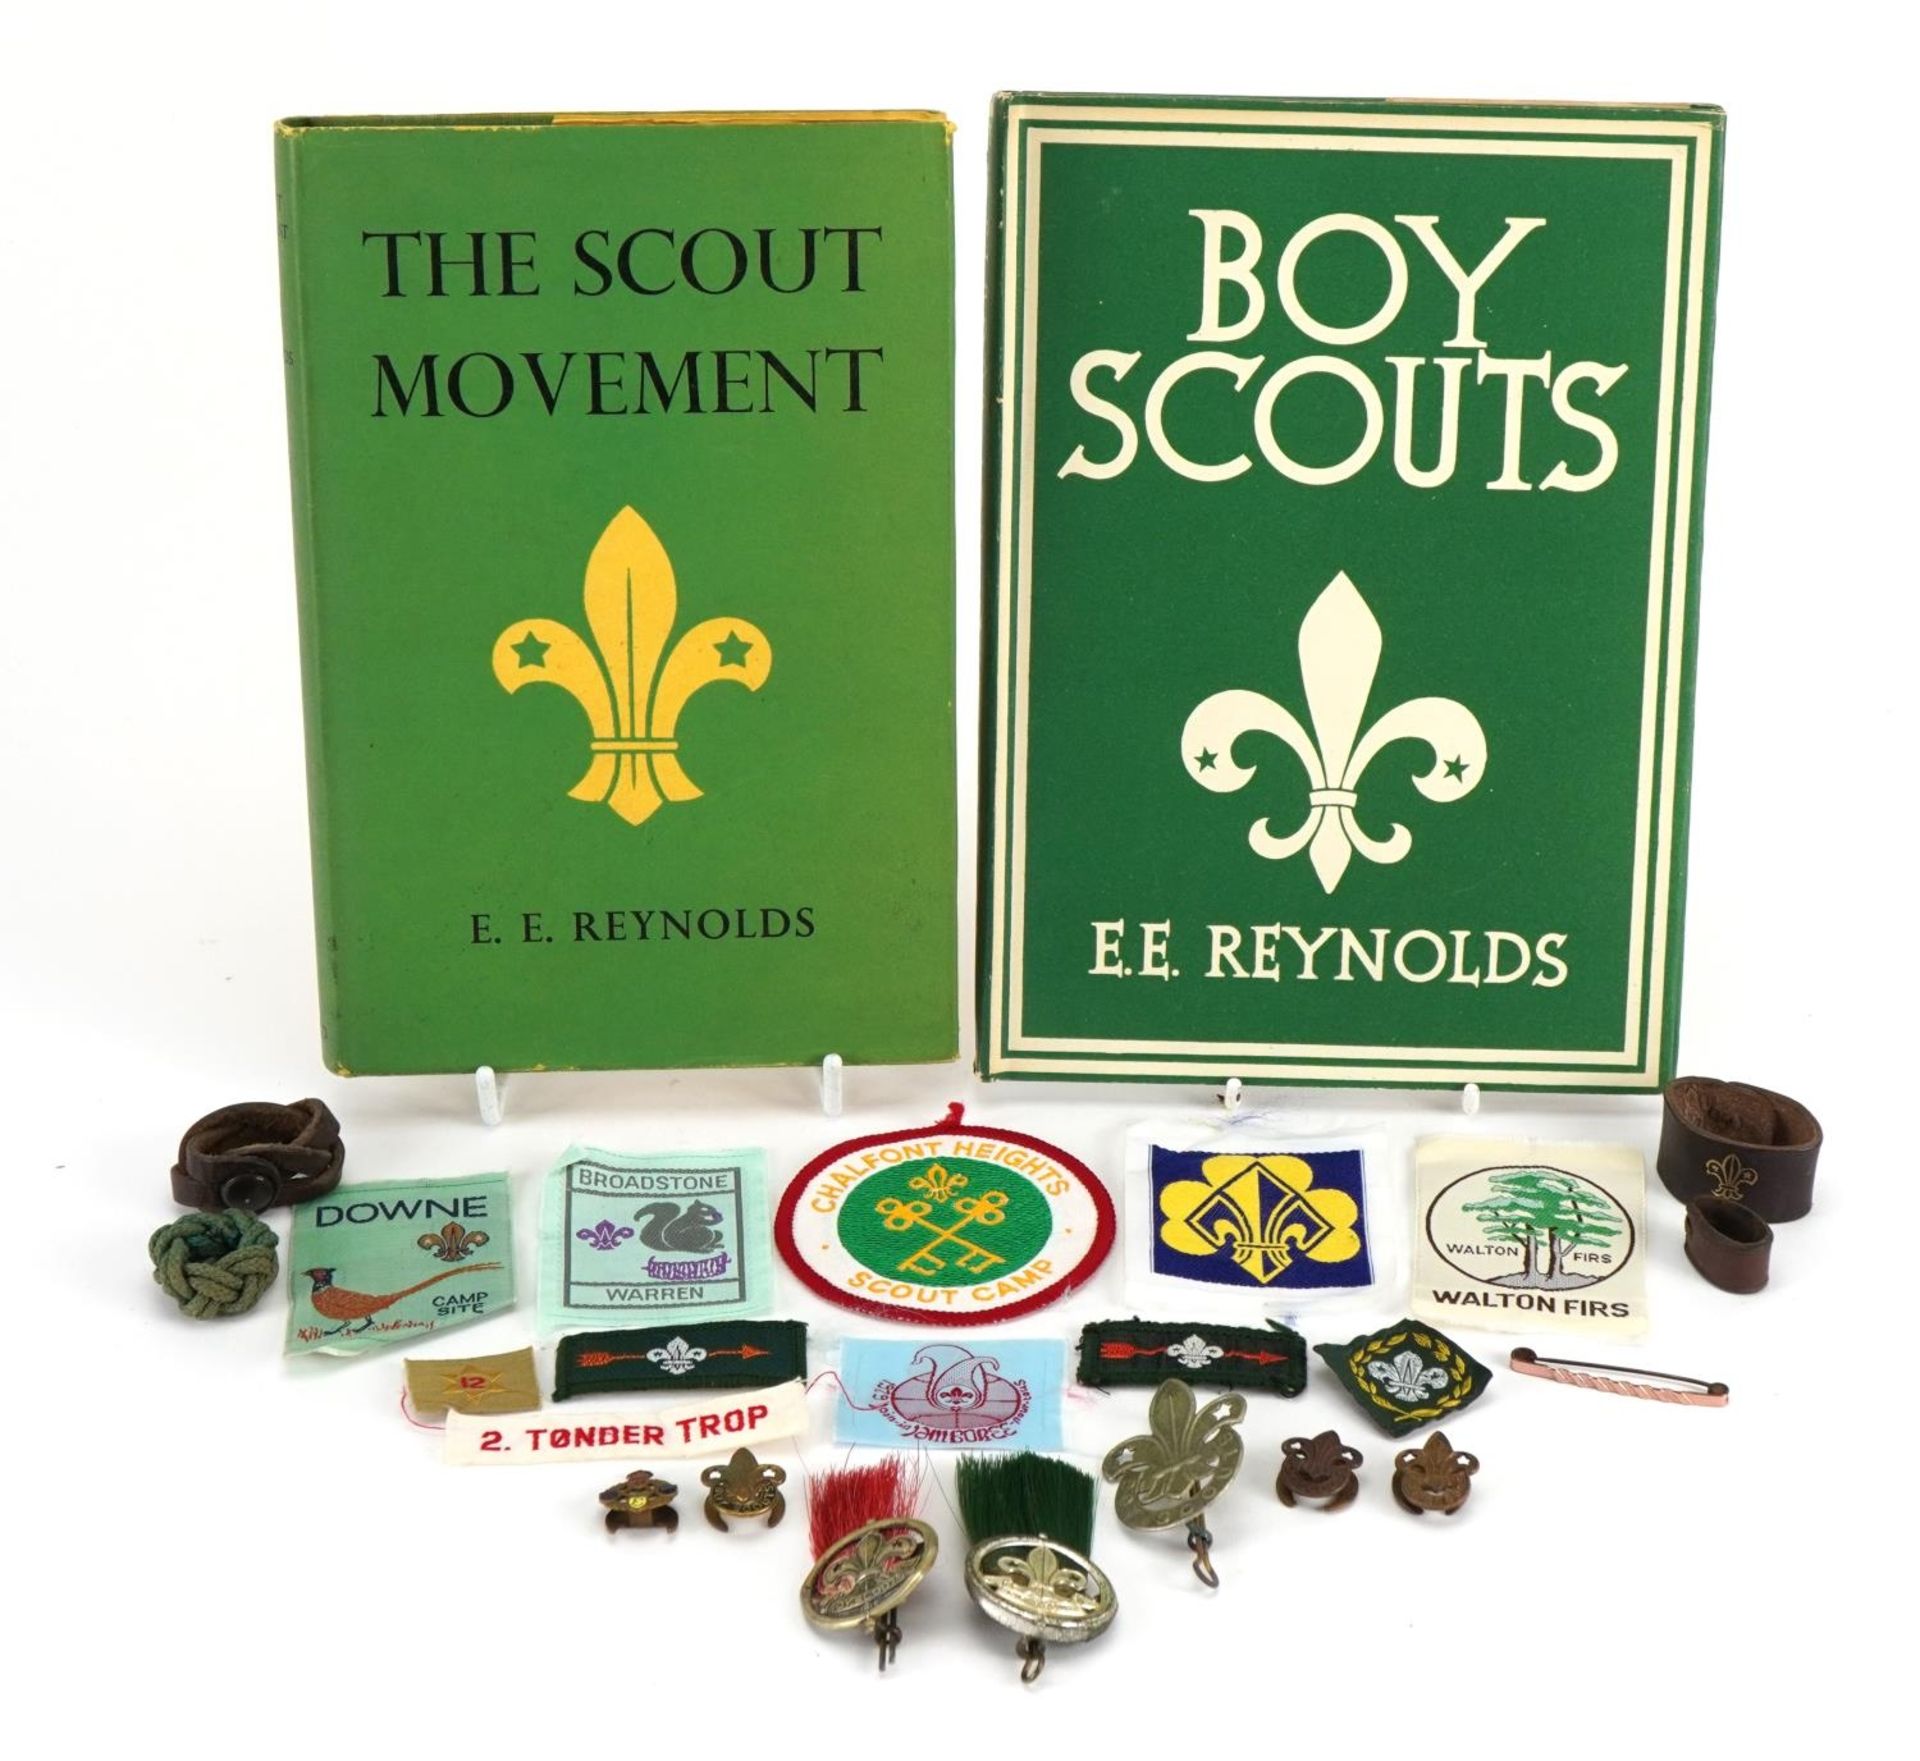 Scouting interest collectables including two hardback books and badges For further information on